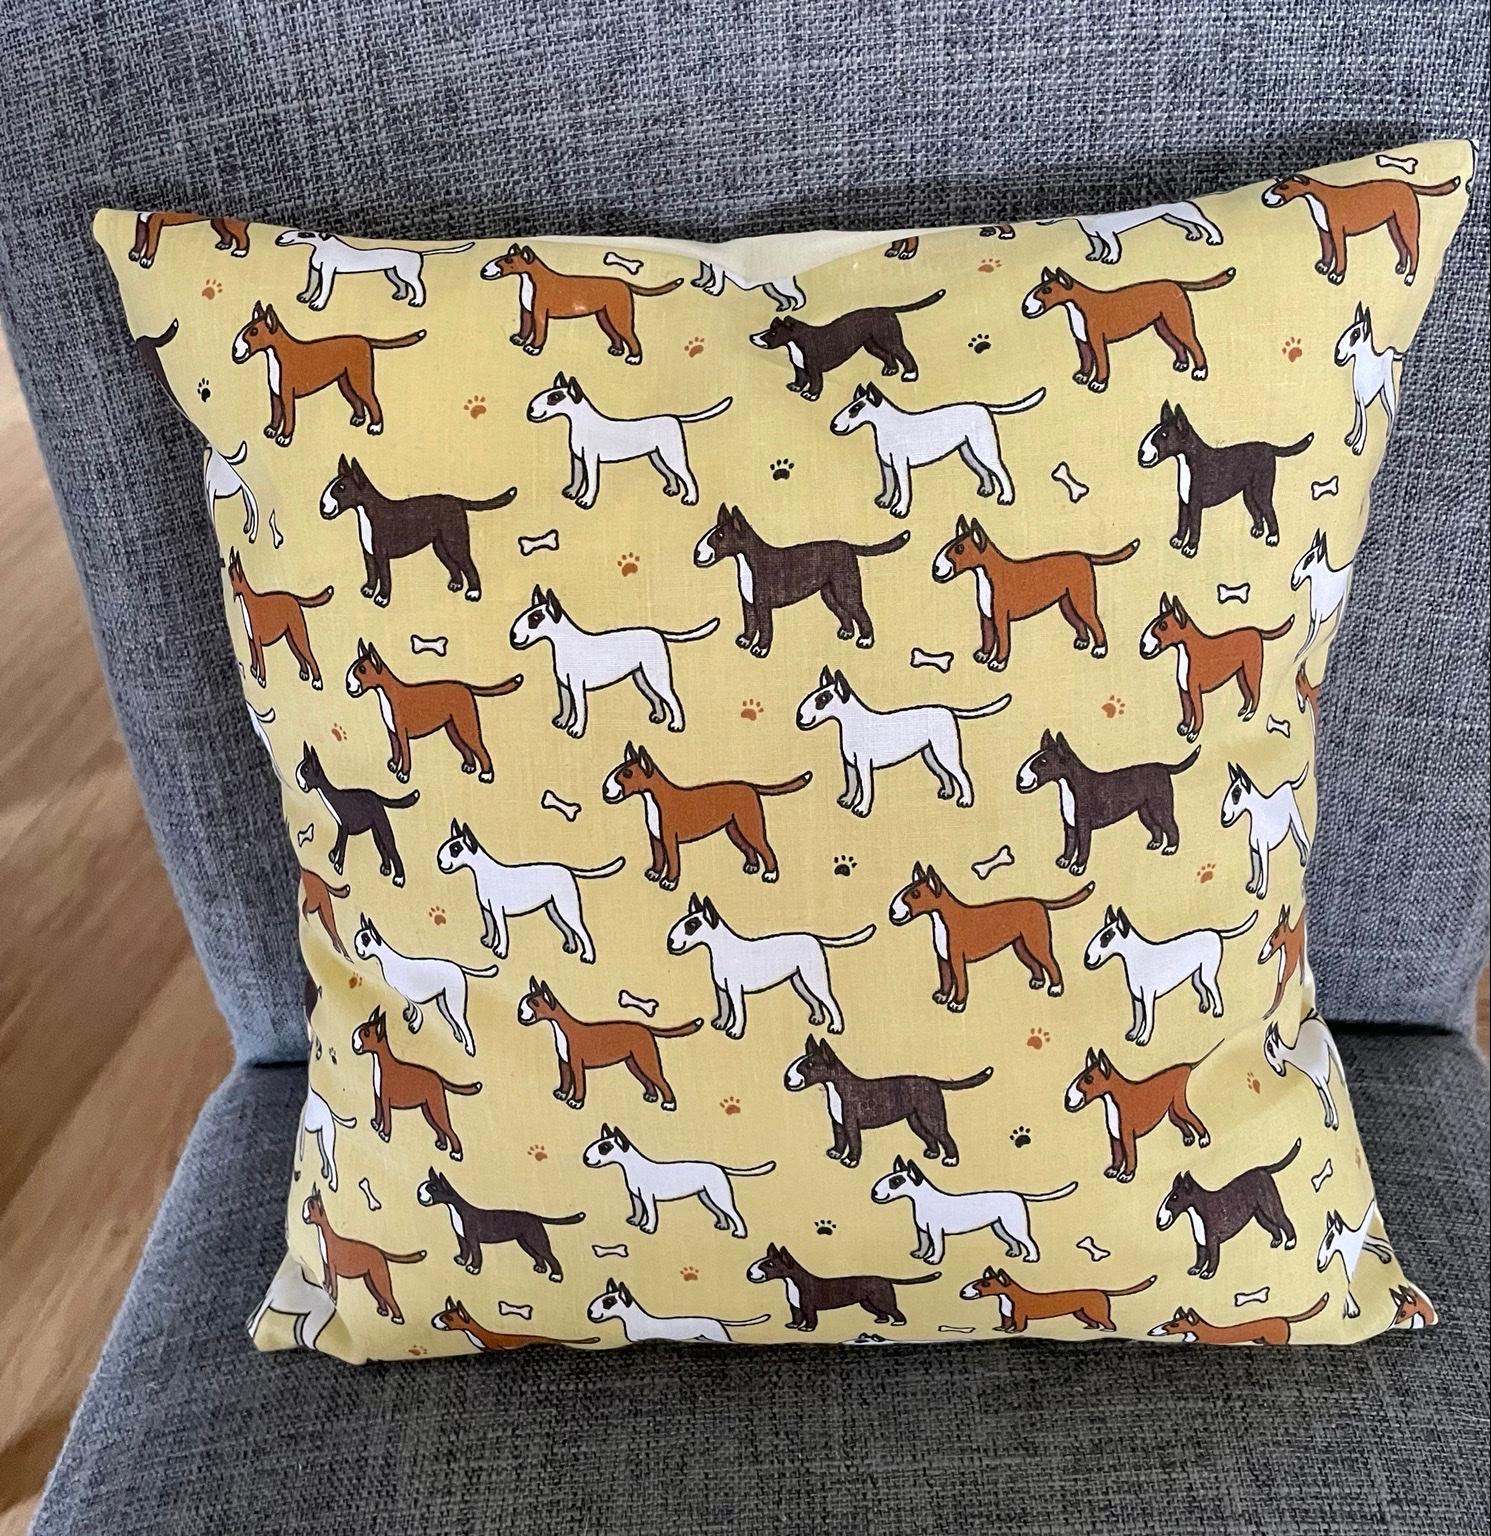 b'NEW English Bull Terrier Dog design Cushion #1' for sale  District'